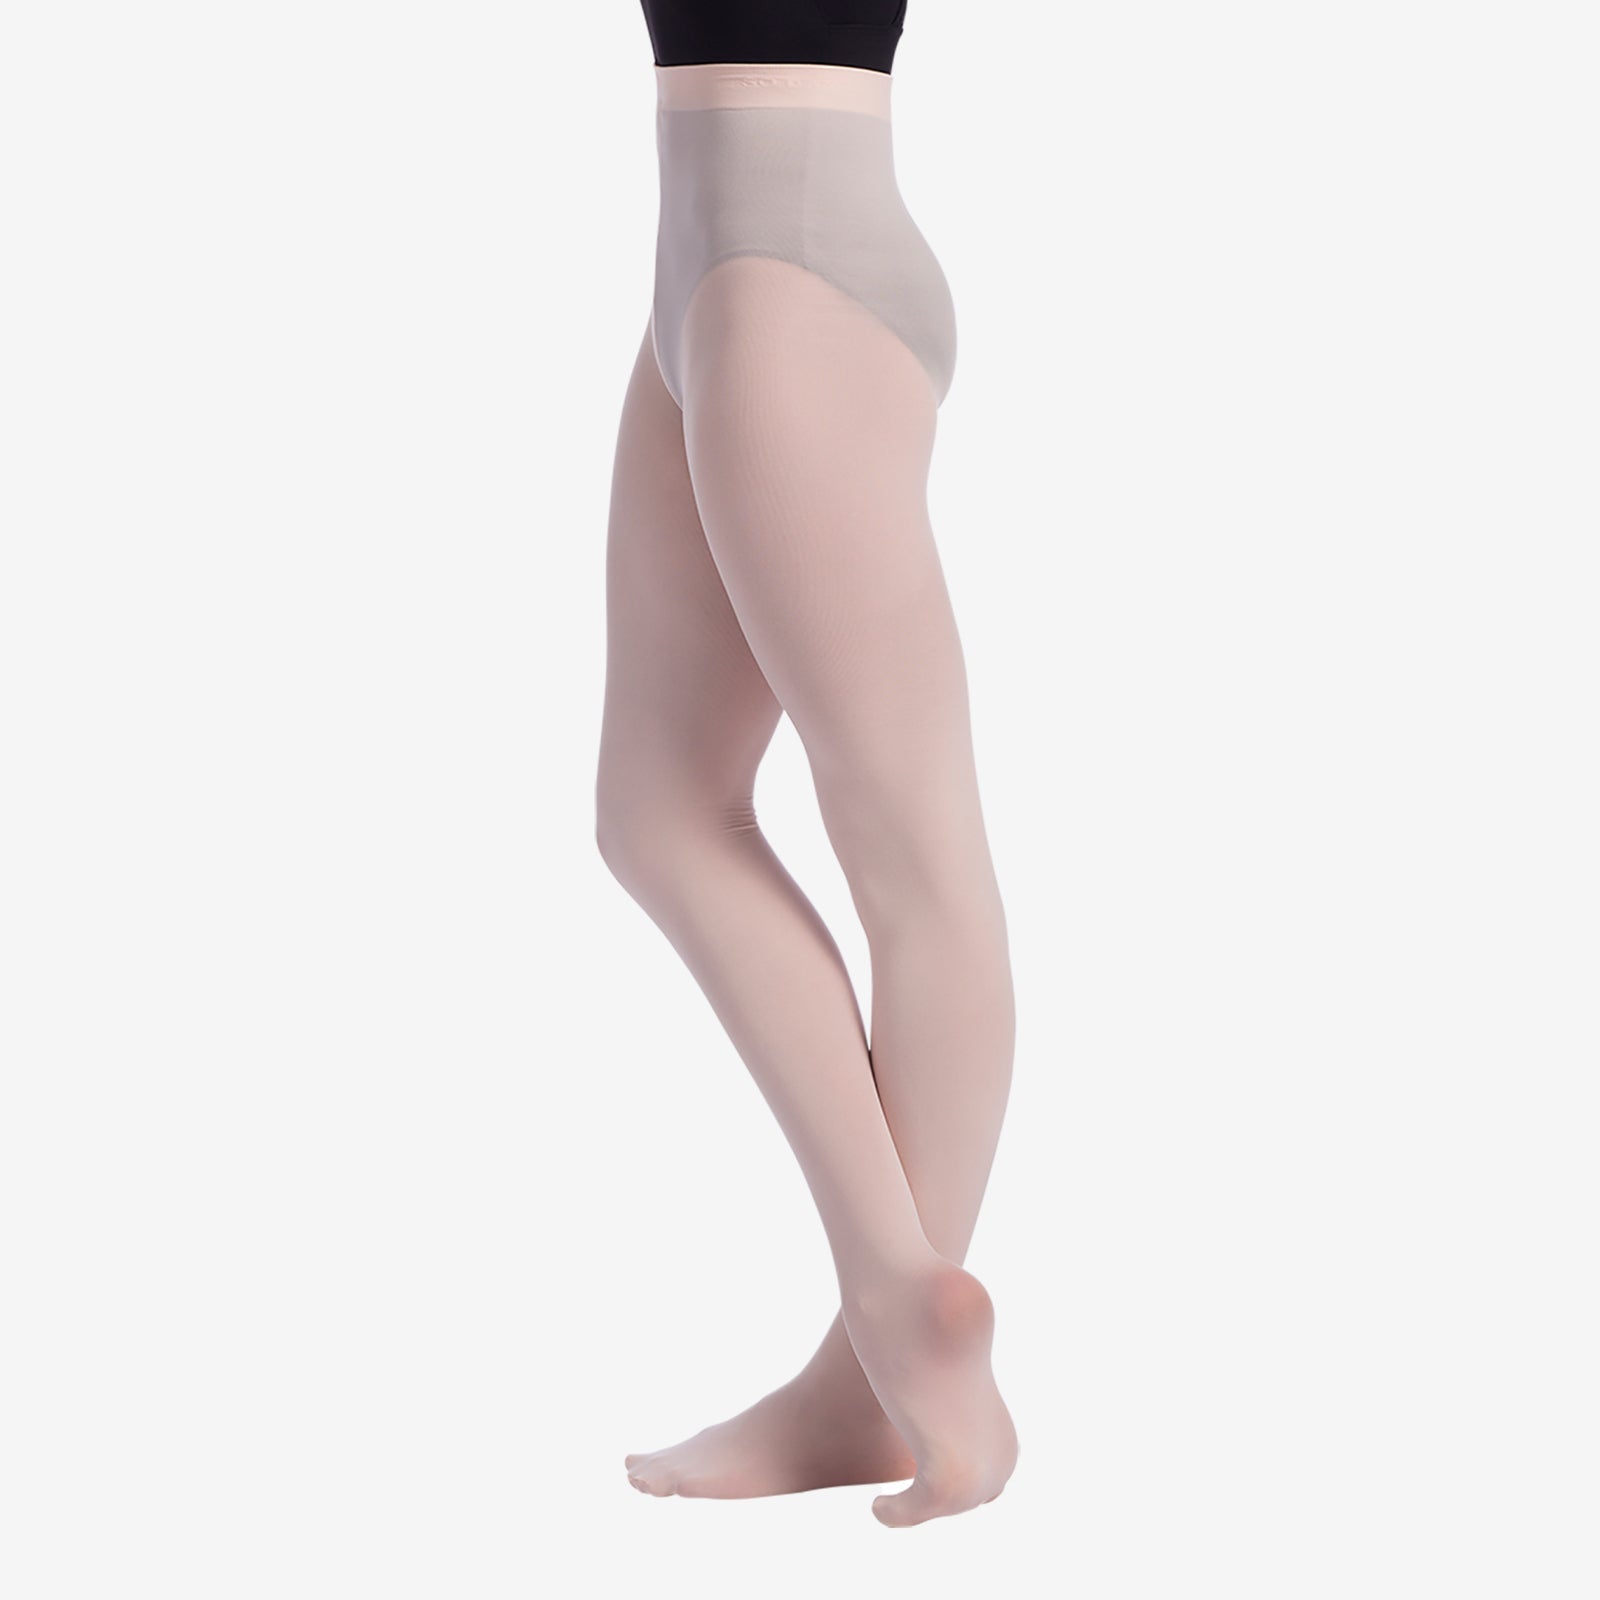 Children's Footed Tights - TS73